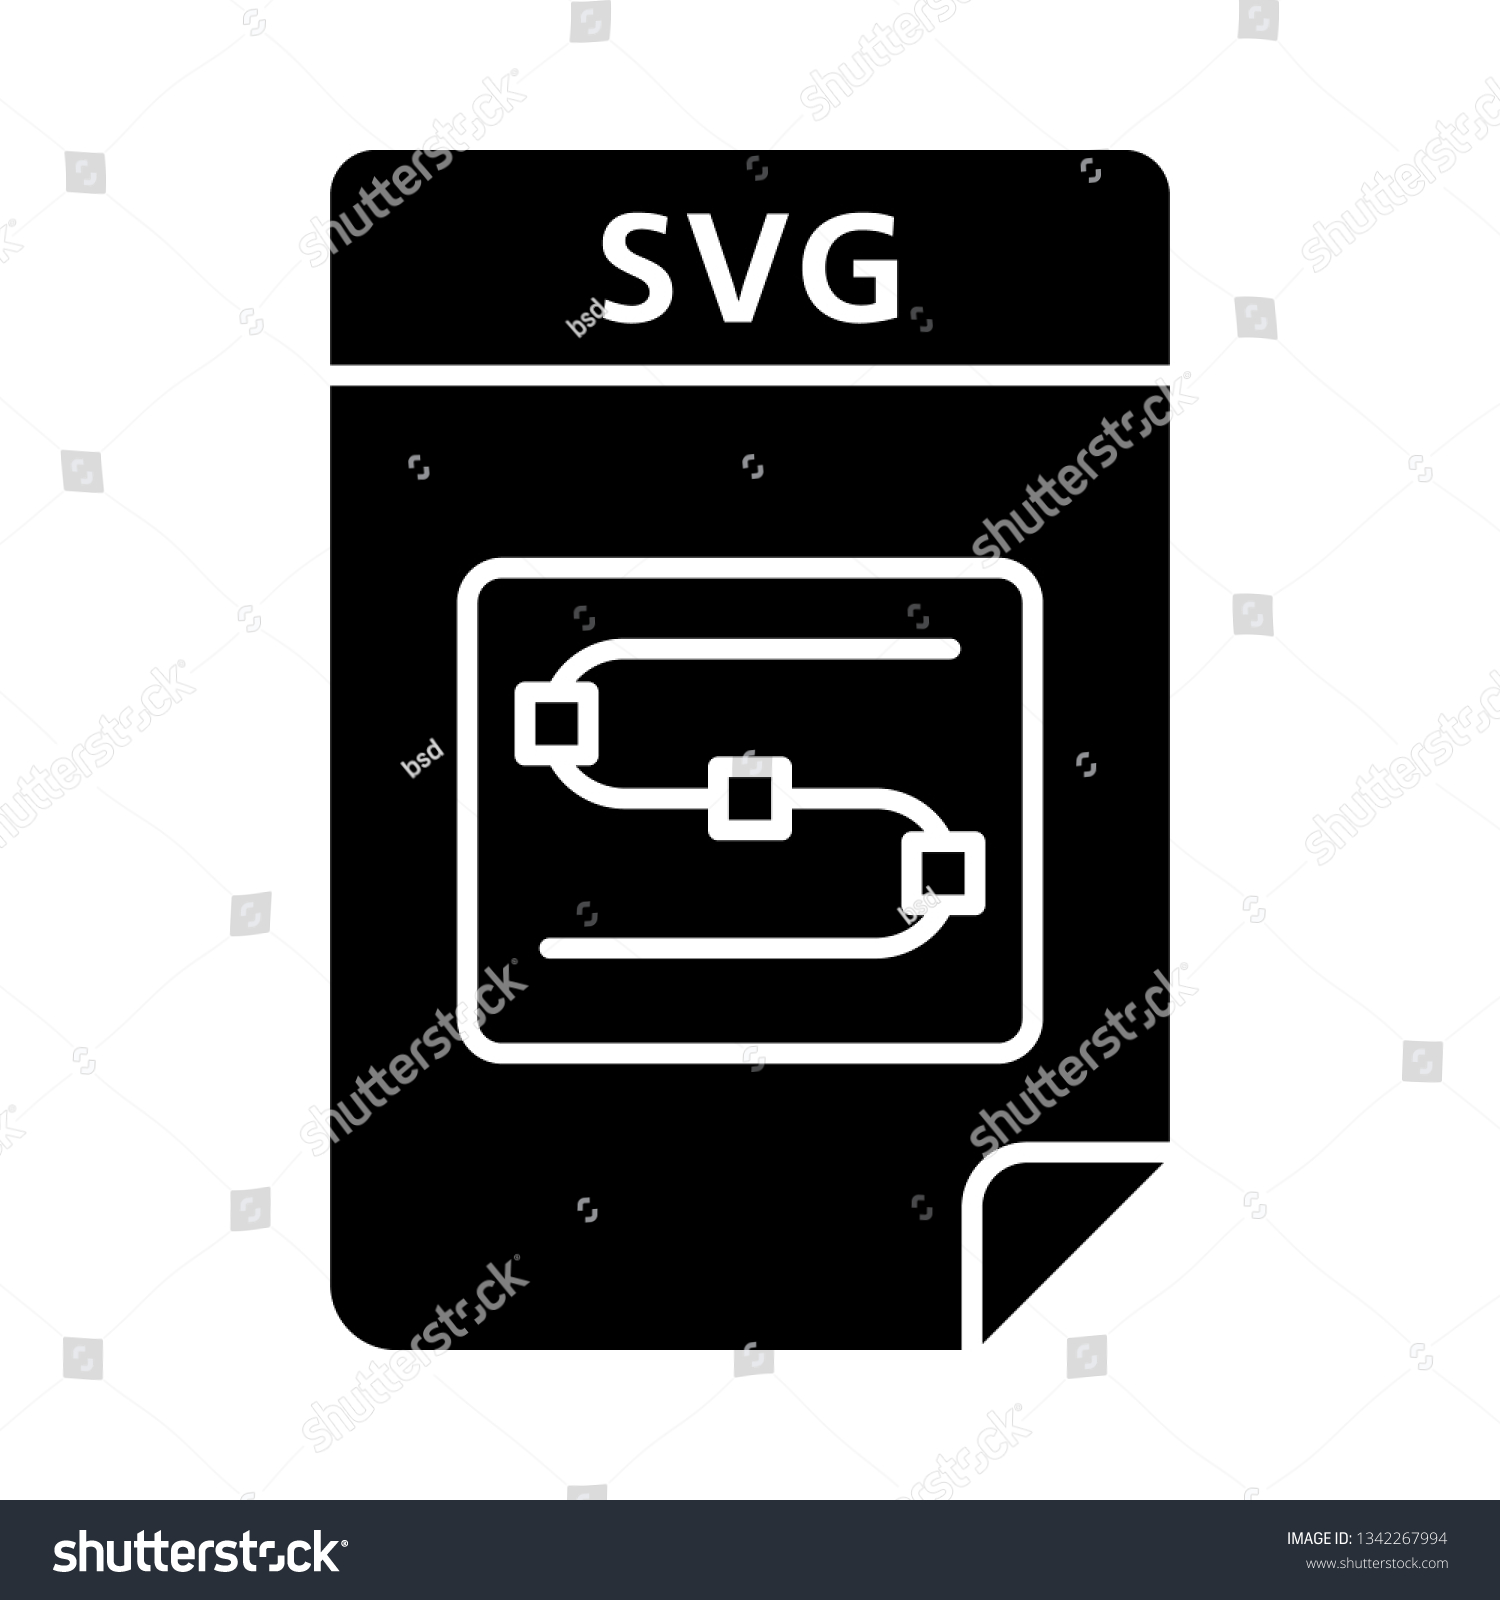 SVG of SVG file glyph icon. Scalable vector graphics. Image file format. Silhouette symbol. Negative space. Vector isolated illustration svg